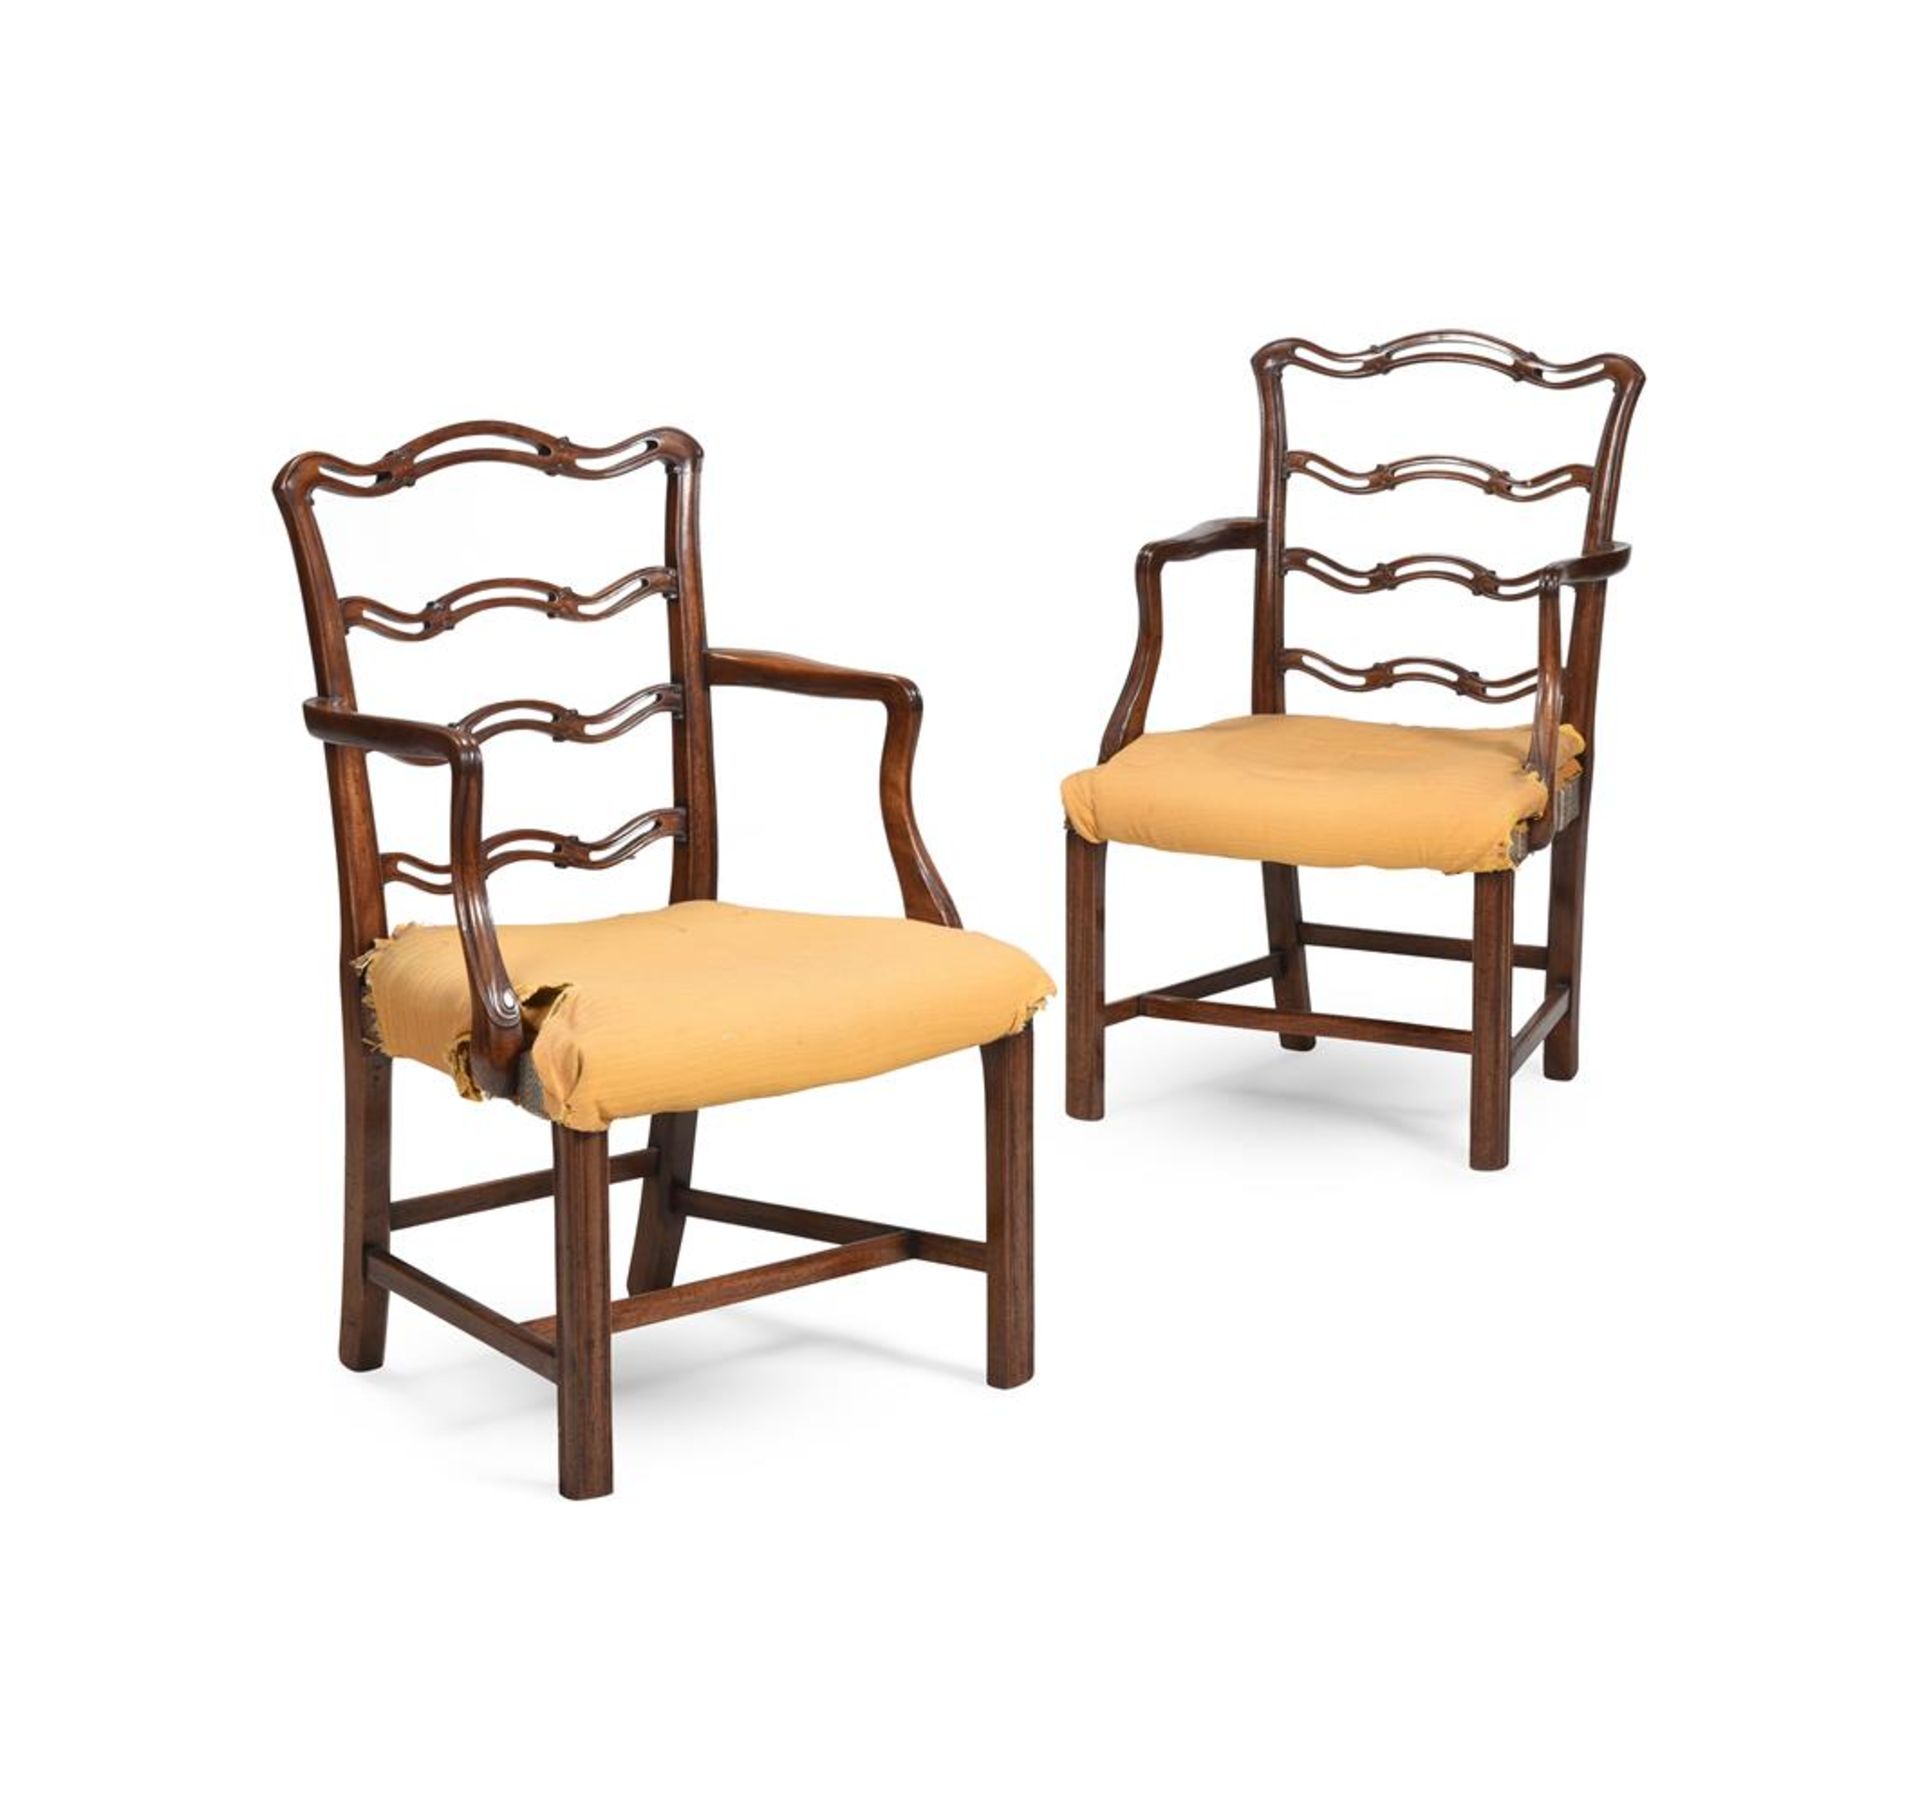 A HARLEQUIN SET OF FOURTEEN MAHOGANY AND UPHOLSTERED LADDERBACK DINING CHAIRS, LATE 19TH CENTURY - Image 2 of 6